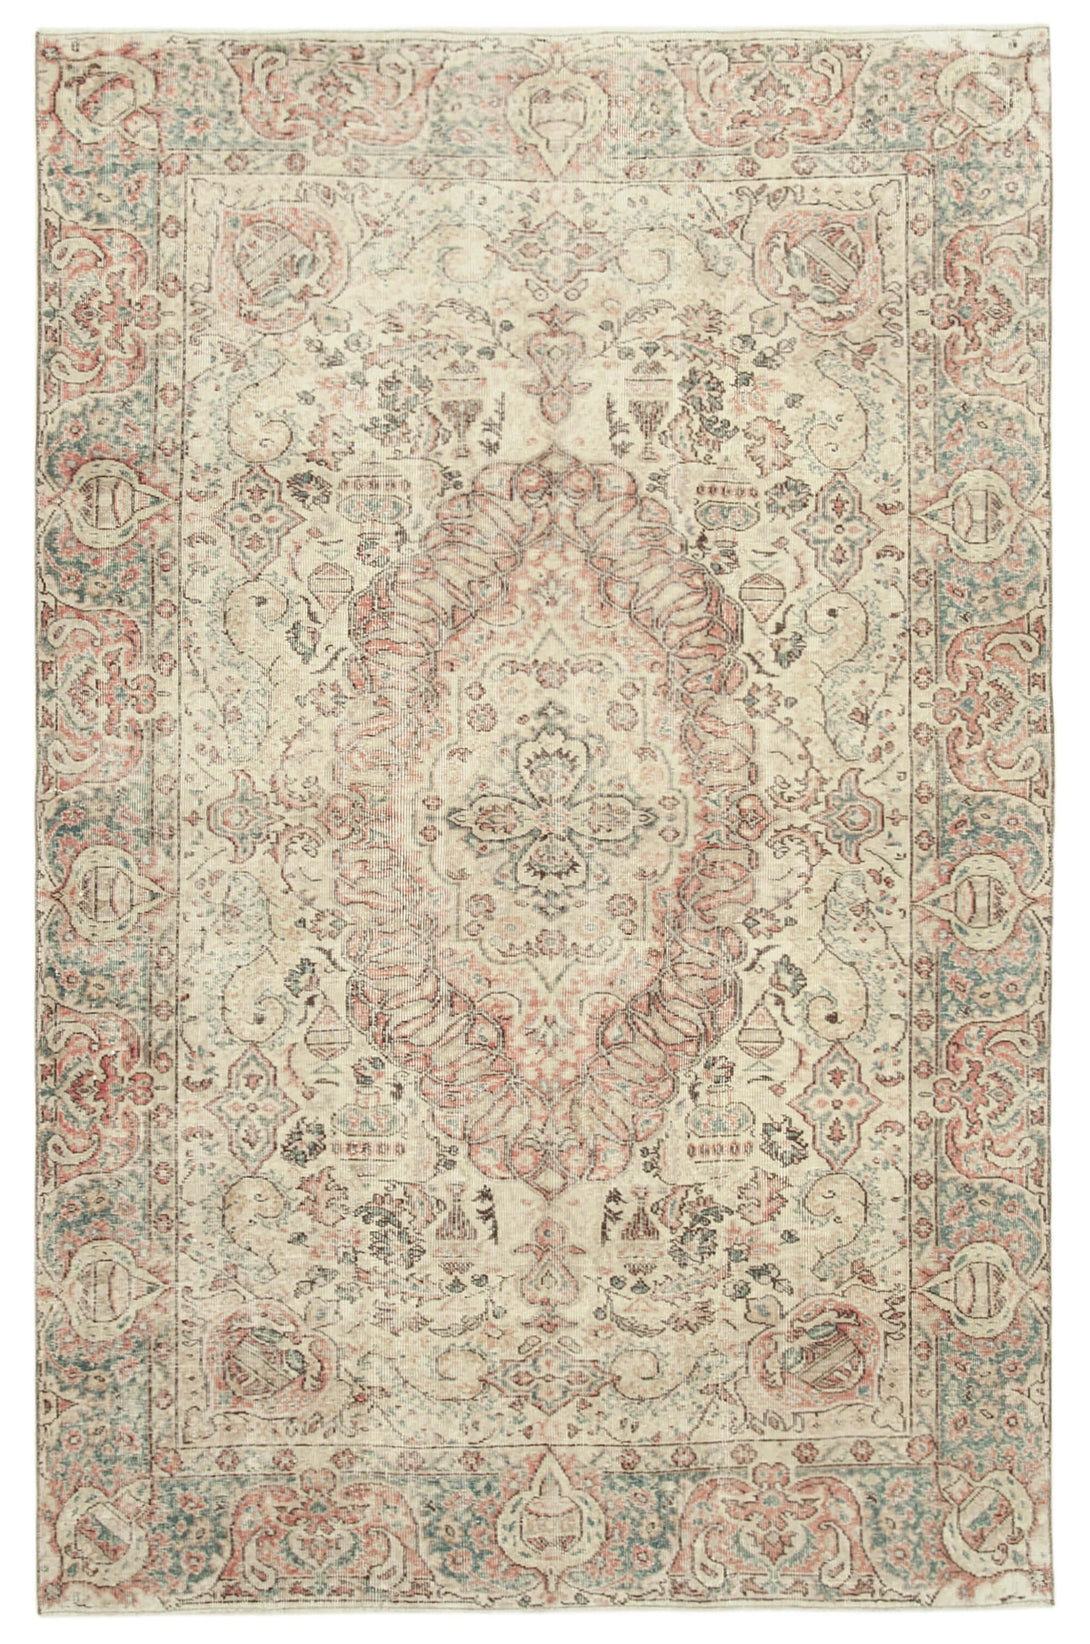 Handmade White Wash Area Rug > Design# OL-AC-39044 > Size: 6'-4" x 9'-9", Carpet Culture Rugs, Handmade Rugs, NYC Rugs, New Rugs, Shop Rugs, Rug Store, Outlet Rugs, SoHo Rugs, Rugs in USA